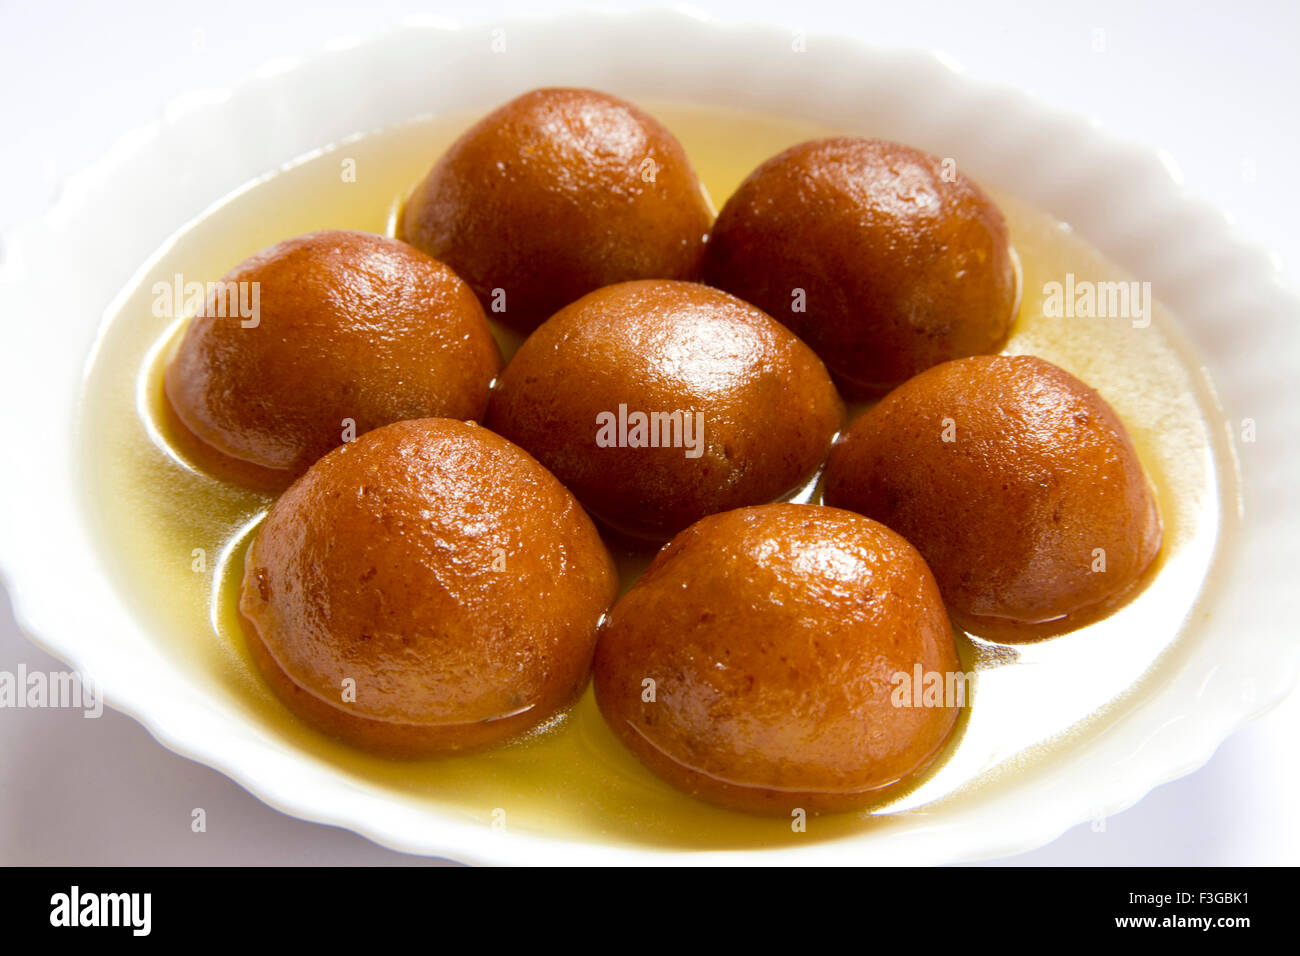 Indian sweet food seven piece of round shape Gulabjamun Bonbon Confectionery with sugar syrup served in plate Stock Photo